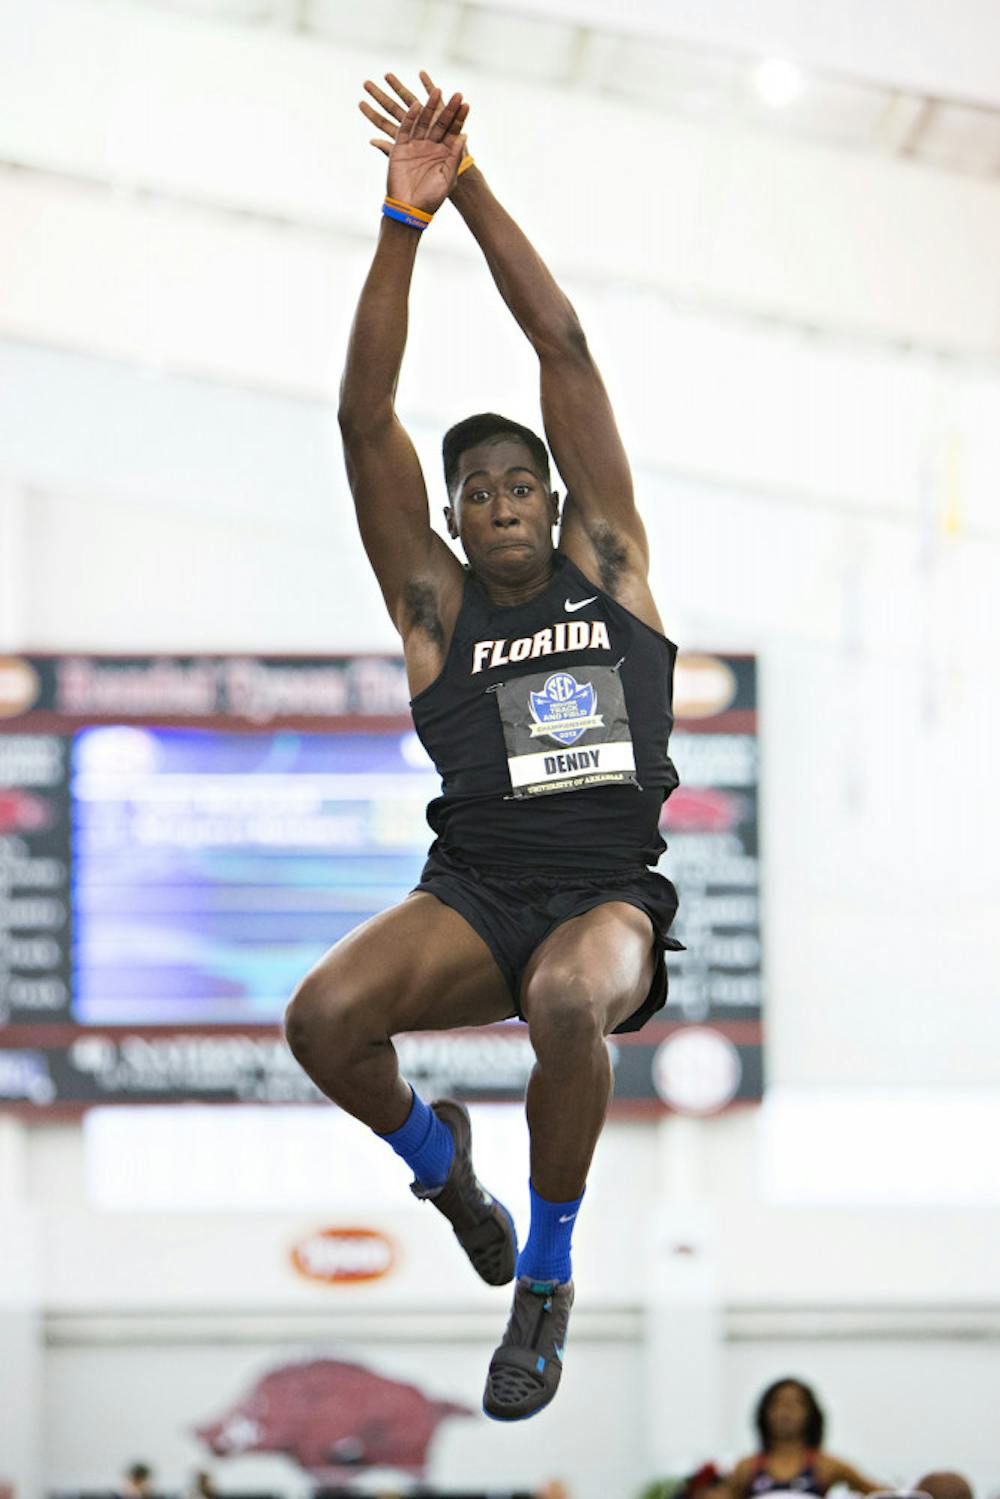 <p><span>Sophomore jumper Marquis Dendy competes in the long jump at the SEC Indoor Track Championships on Feb. 23 in Fayetteville, Ark. Dendy qualified for the men's triple jump in next week's NCAA Outdoors Championships.</span></p>